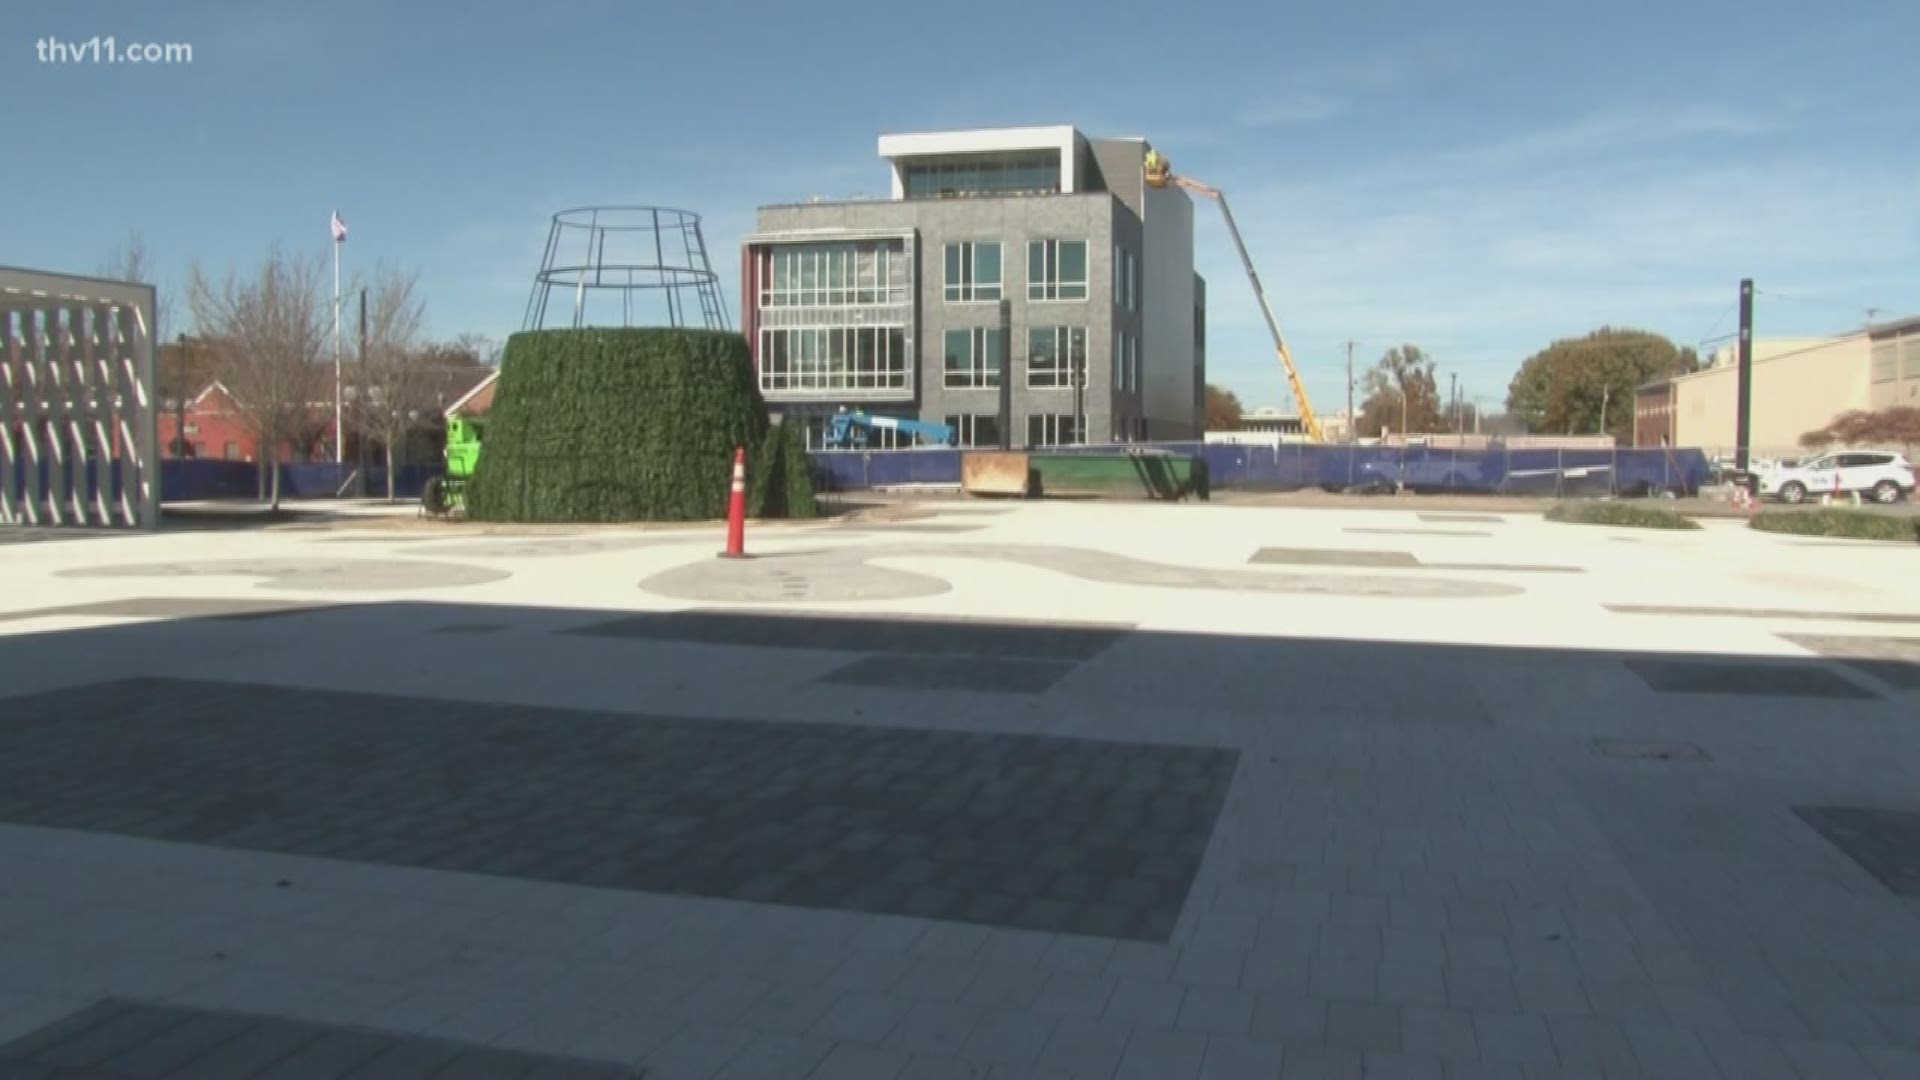 Downtown North Little Rock is getting a facelift right in the middle of Main Street. The highly-anticipated Argenta Plaza is under two weeks away from opening!